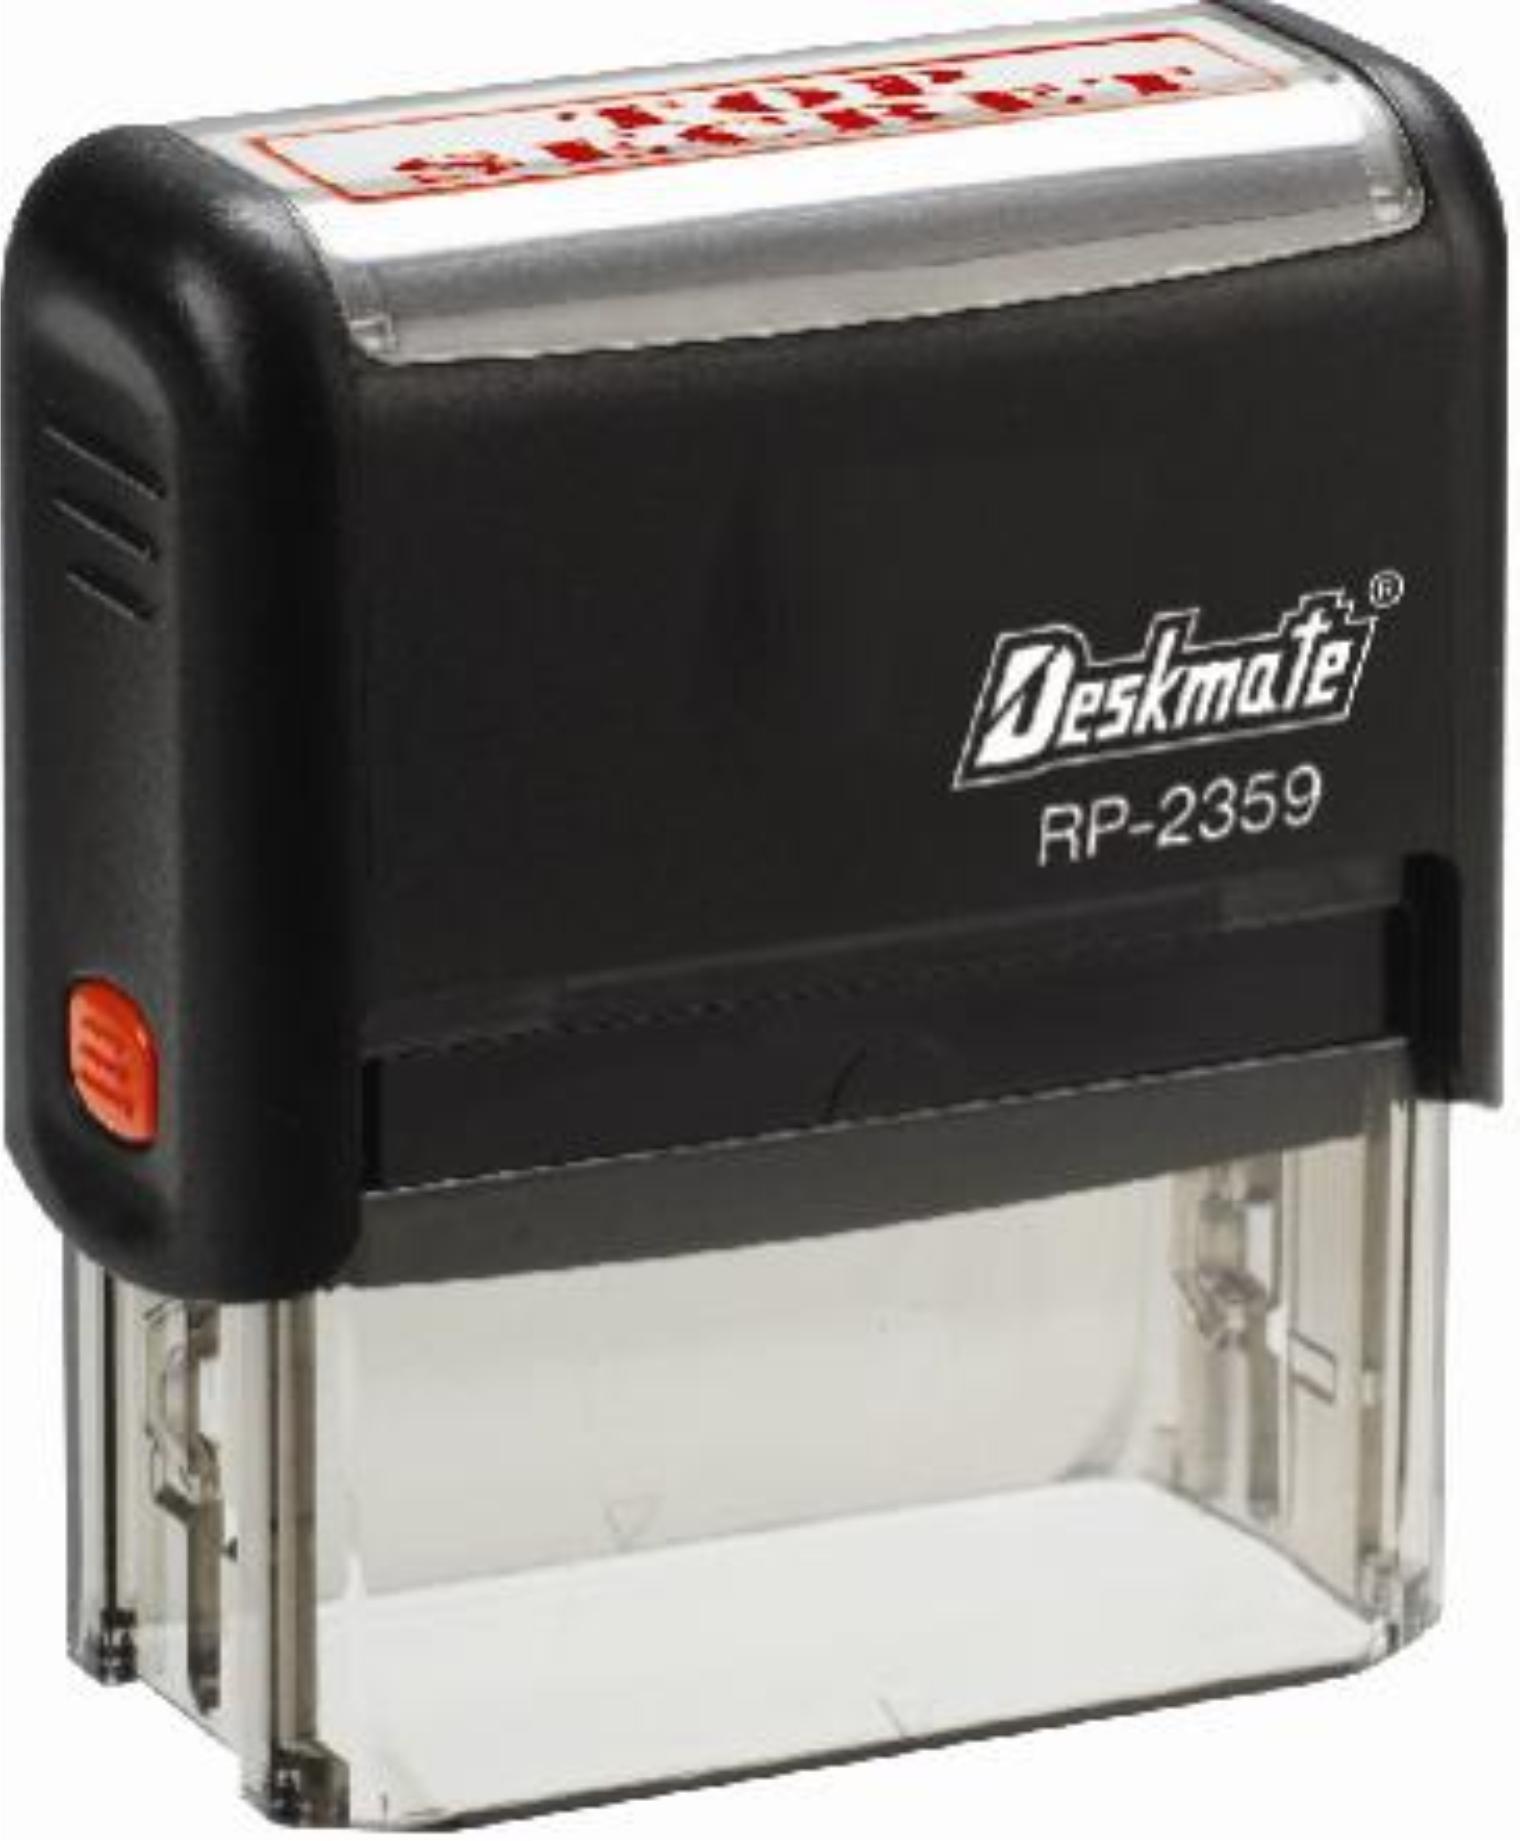 Self Inking Rubber Stamps